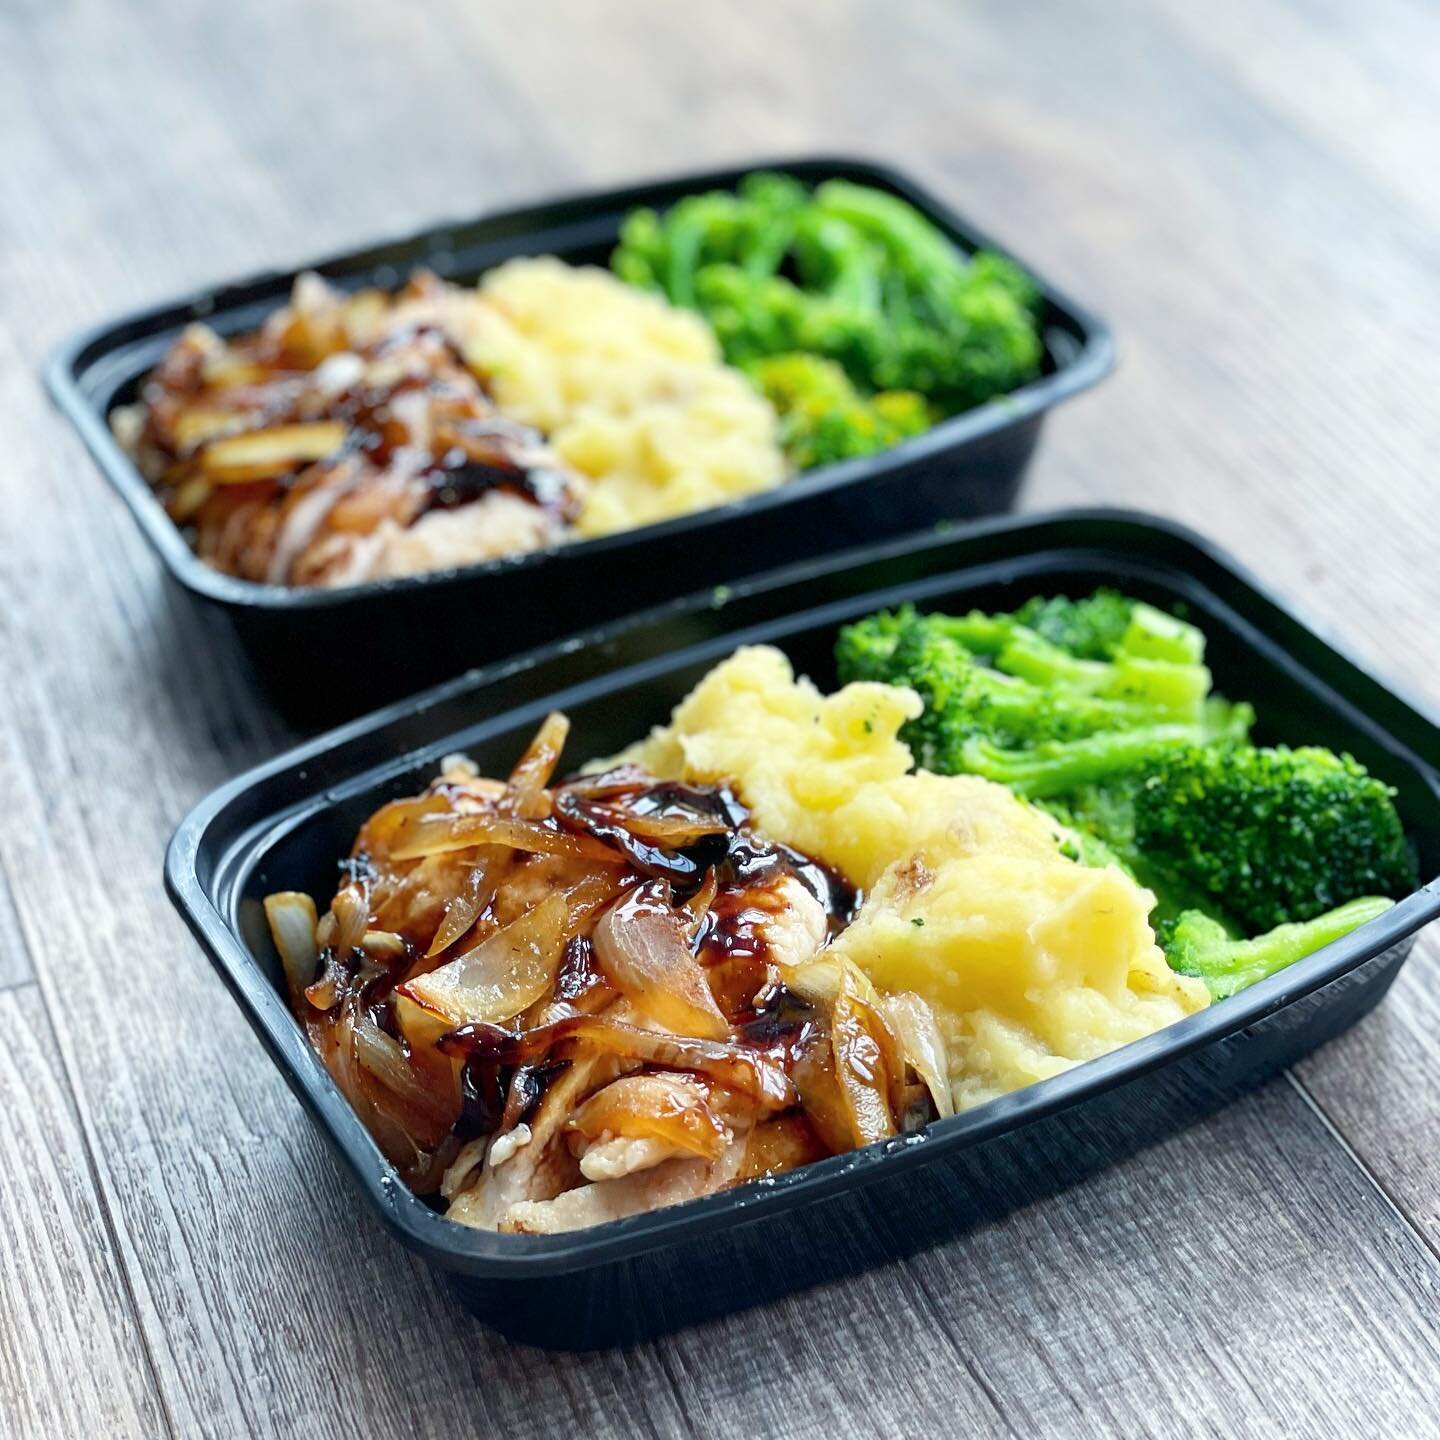 Balsamic chicken is the perfect the balance between sweet and tangy! Served with a creamy mashed potato that balances out the flavors of the tender chicken and a side of broccoli. Did I mention the chicken also has caramelized onions on it? Ya, it&rs